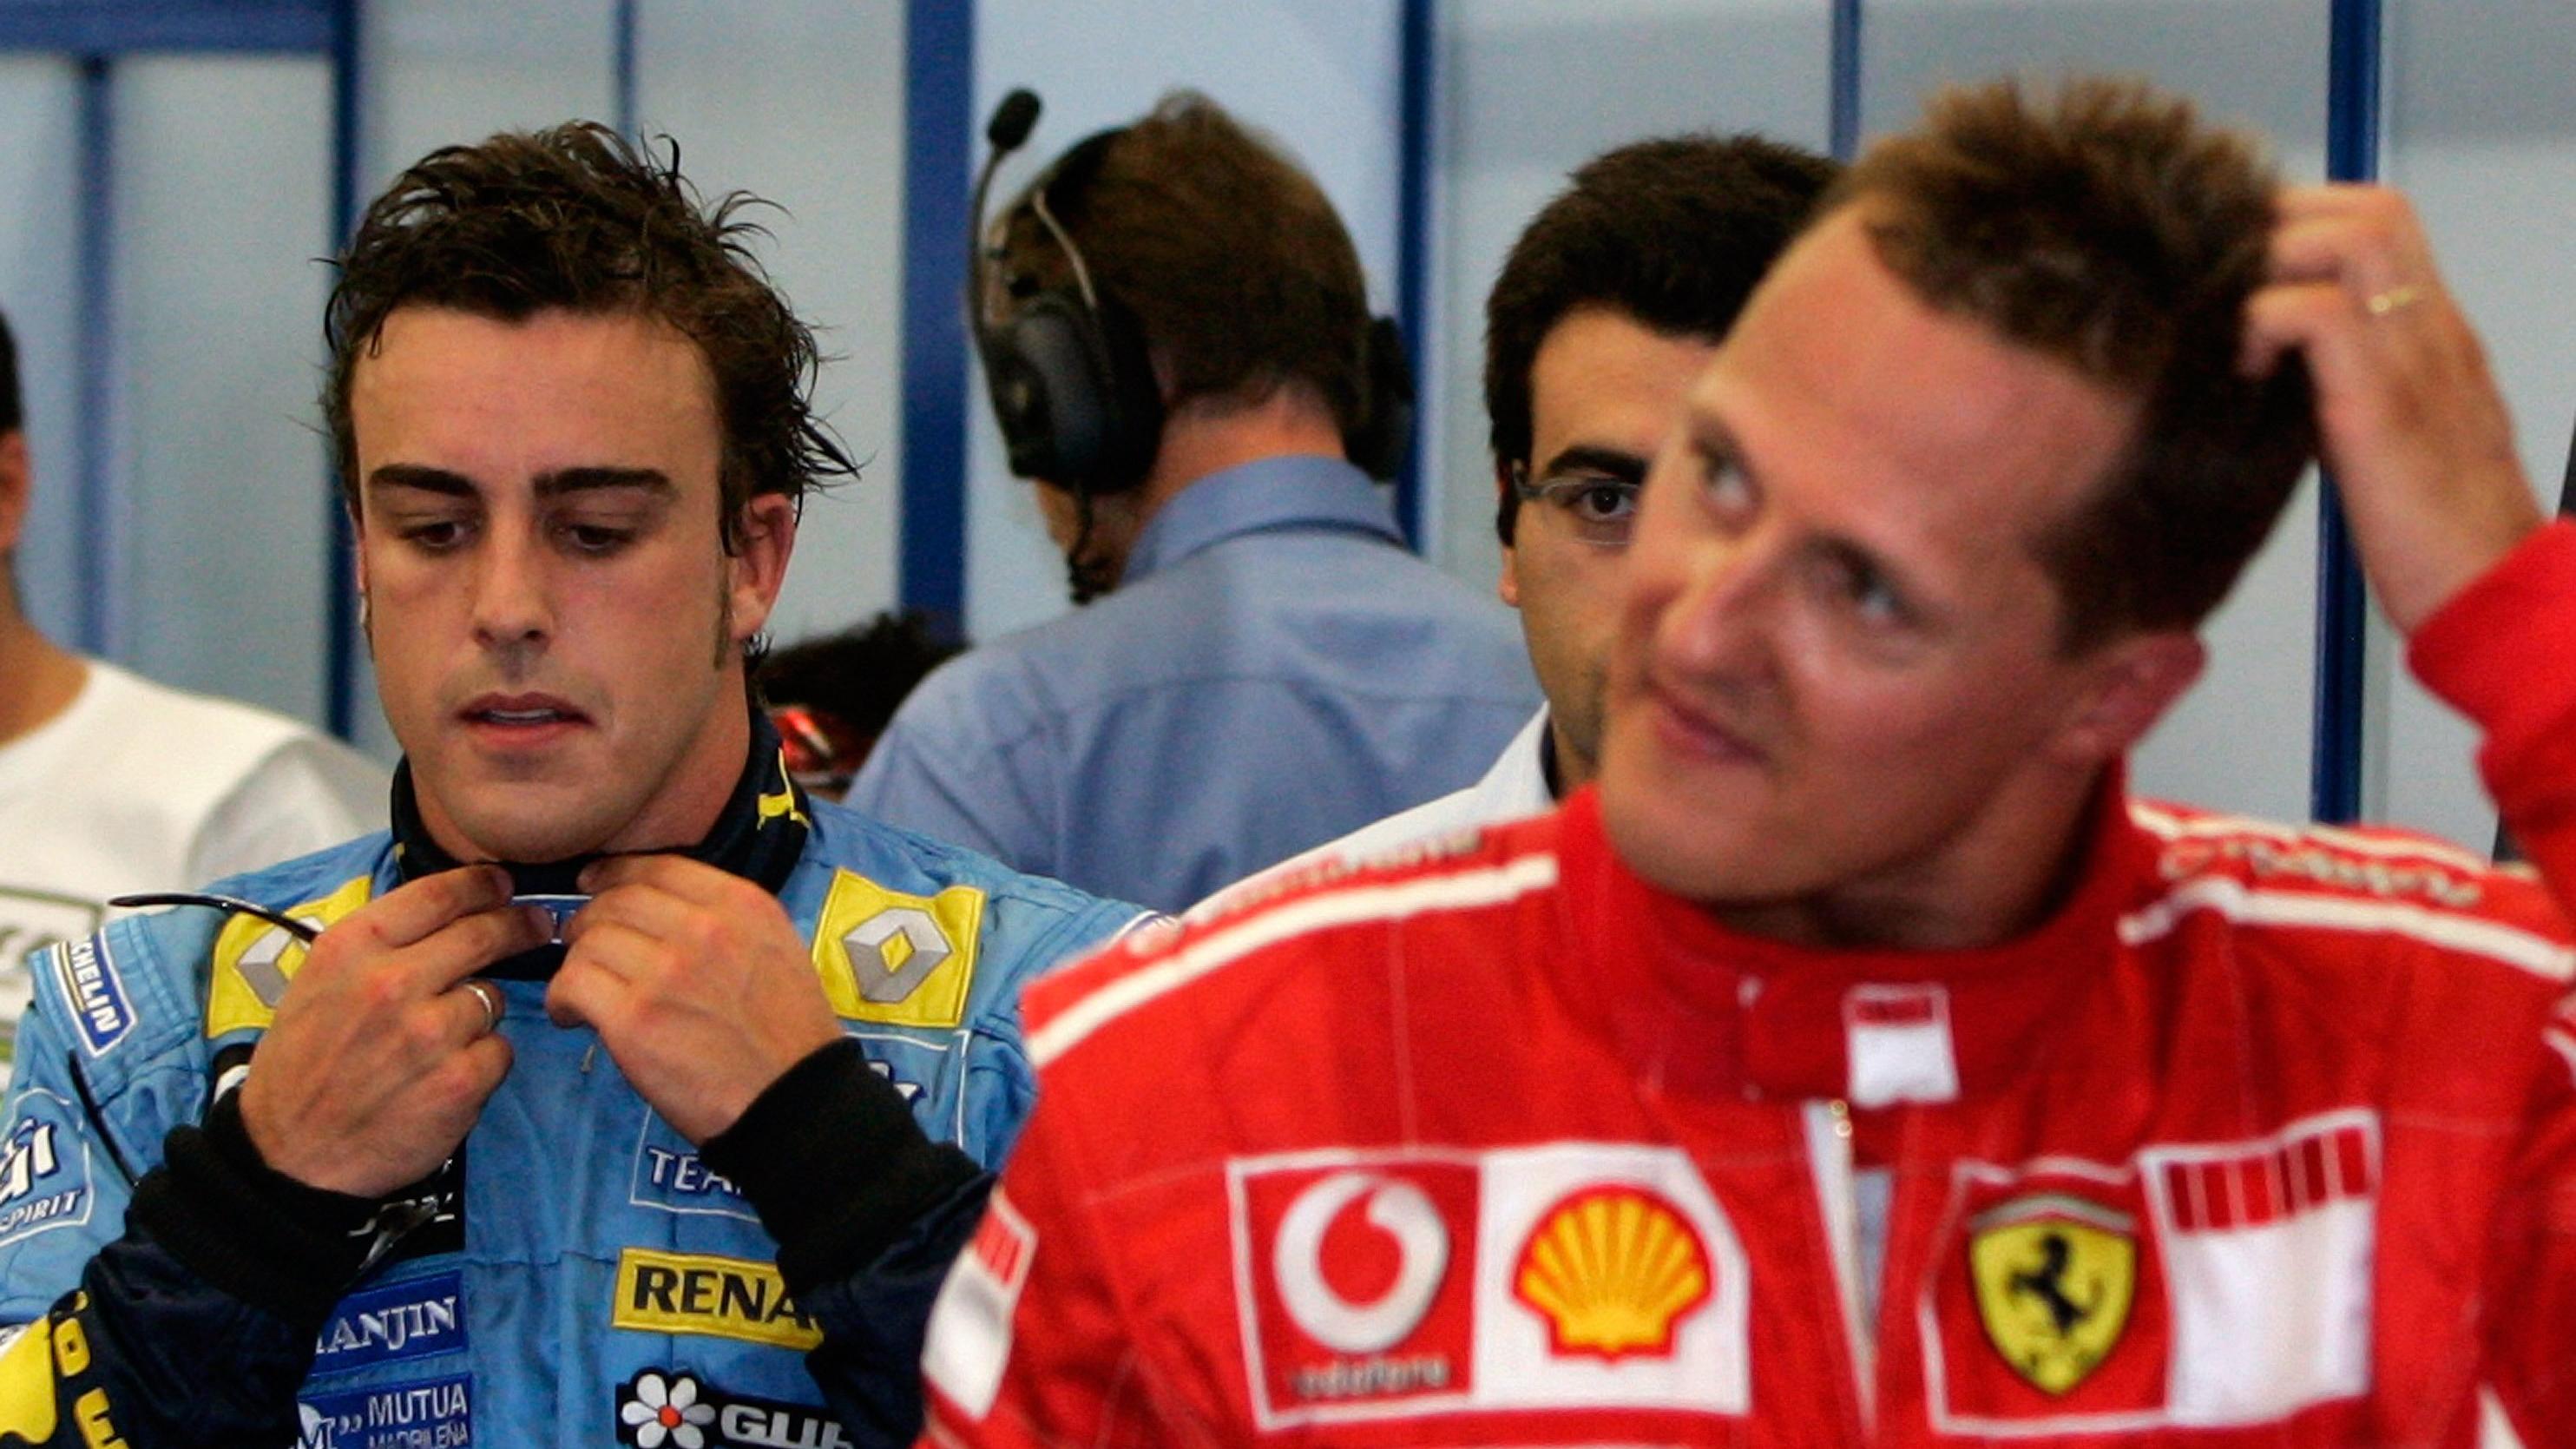 German Formula One driver Michael Schumacher (R) of Scuderia Ferrari and Spanish Fernando Alonso (rear) of Renault F1 team seen after the Qualifying session at the Istanbul Park circuit near Istanbul, Turkey on Saturday; 26 August 2006. Felipe Masa o